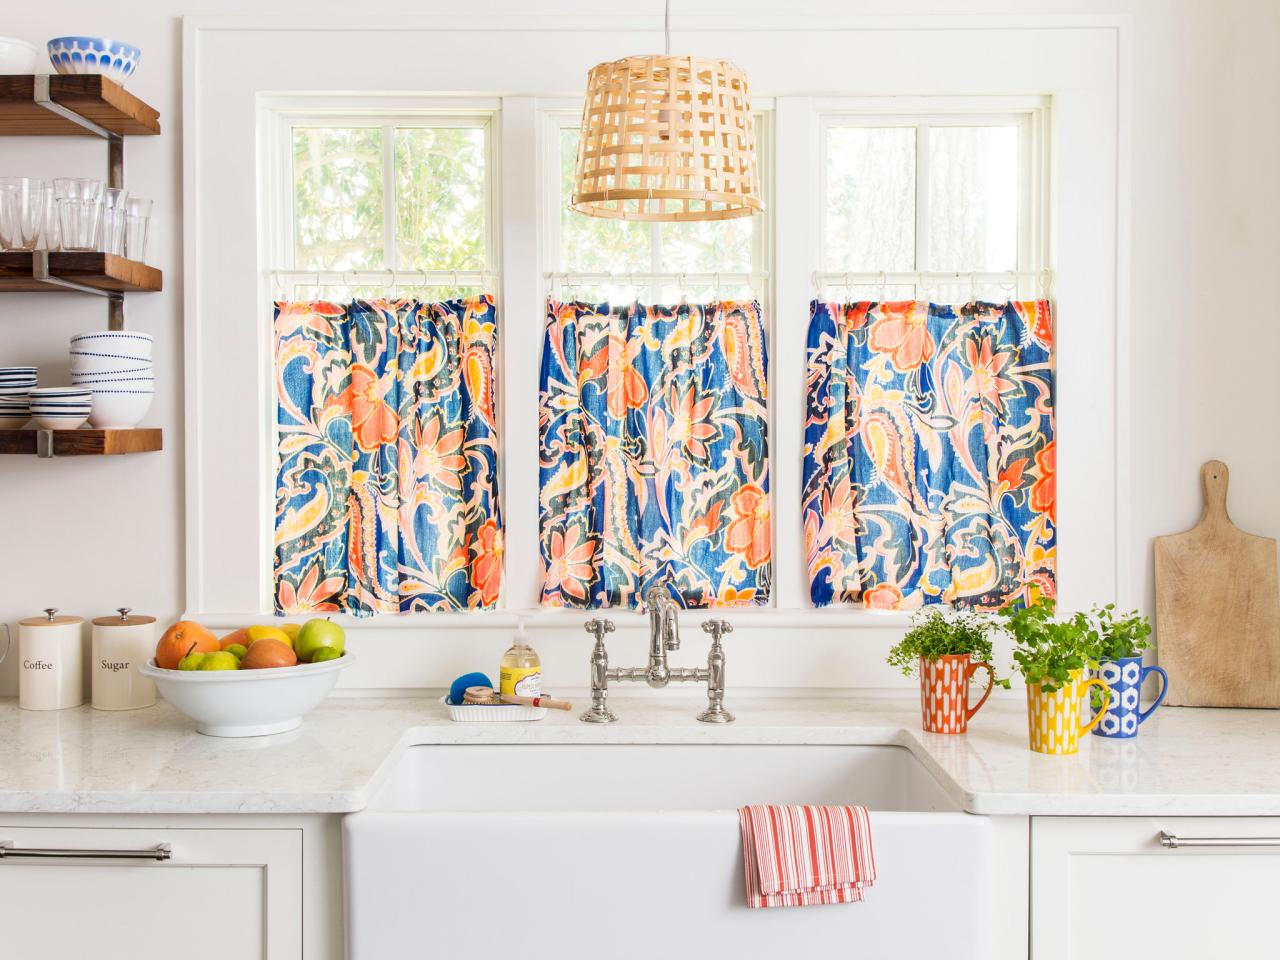 How To Hang Curtains In Kitchen